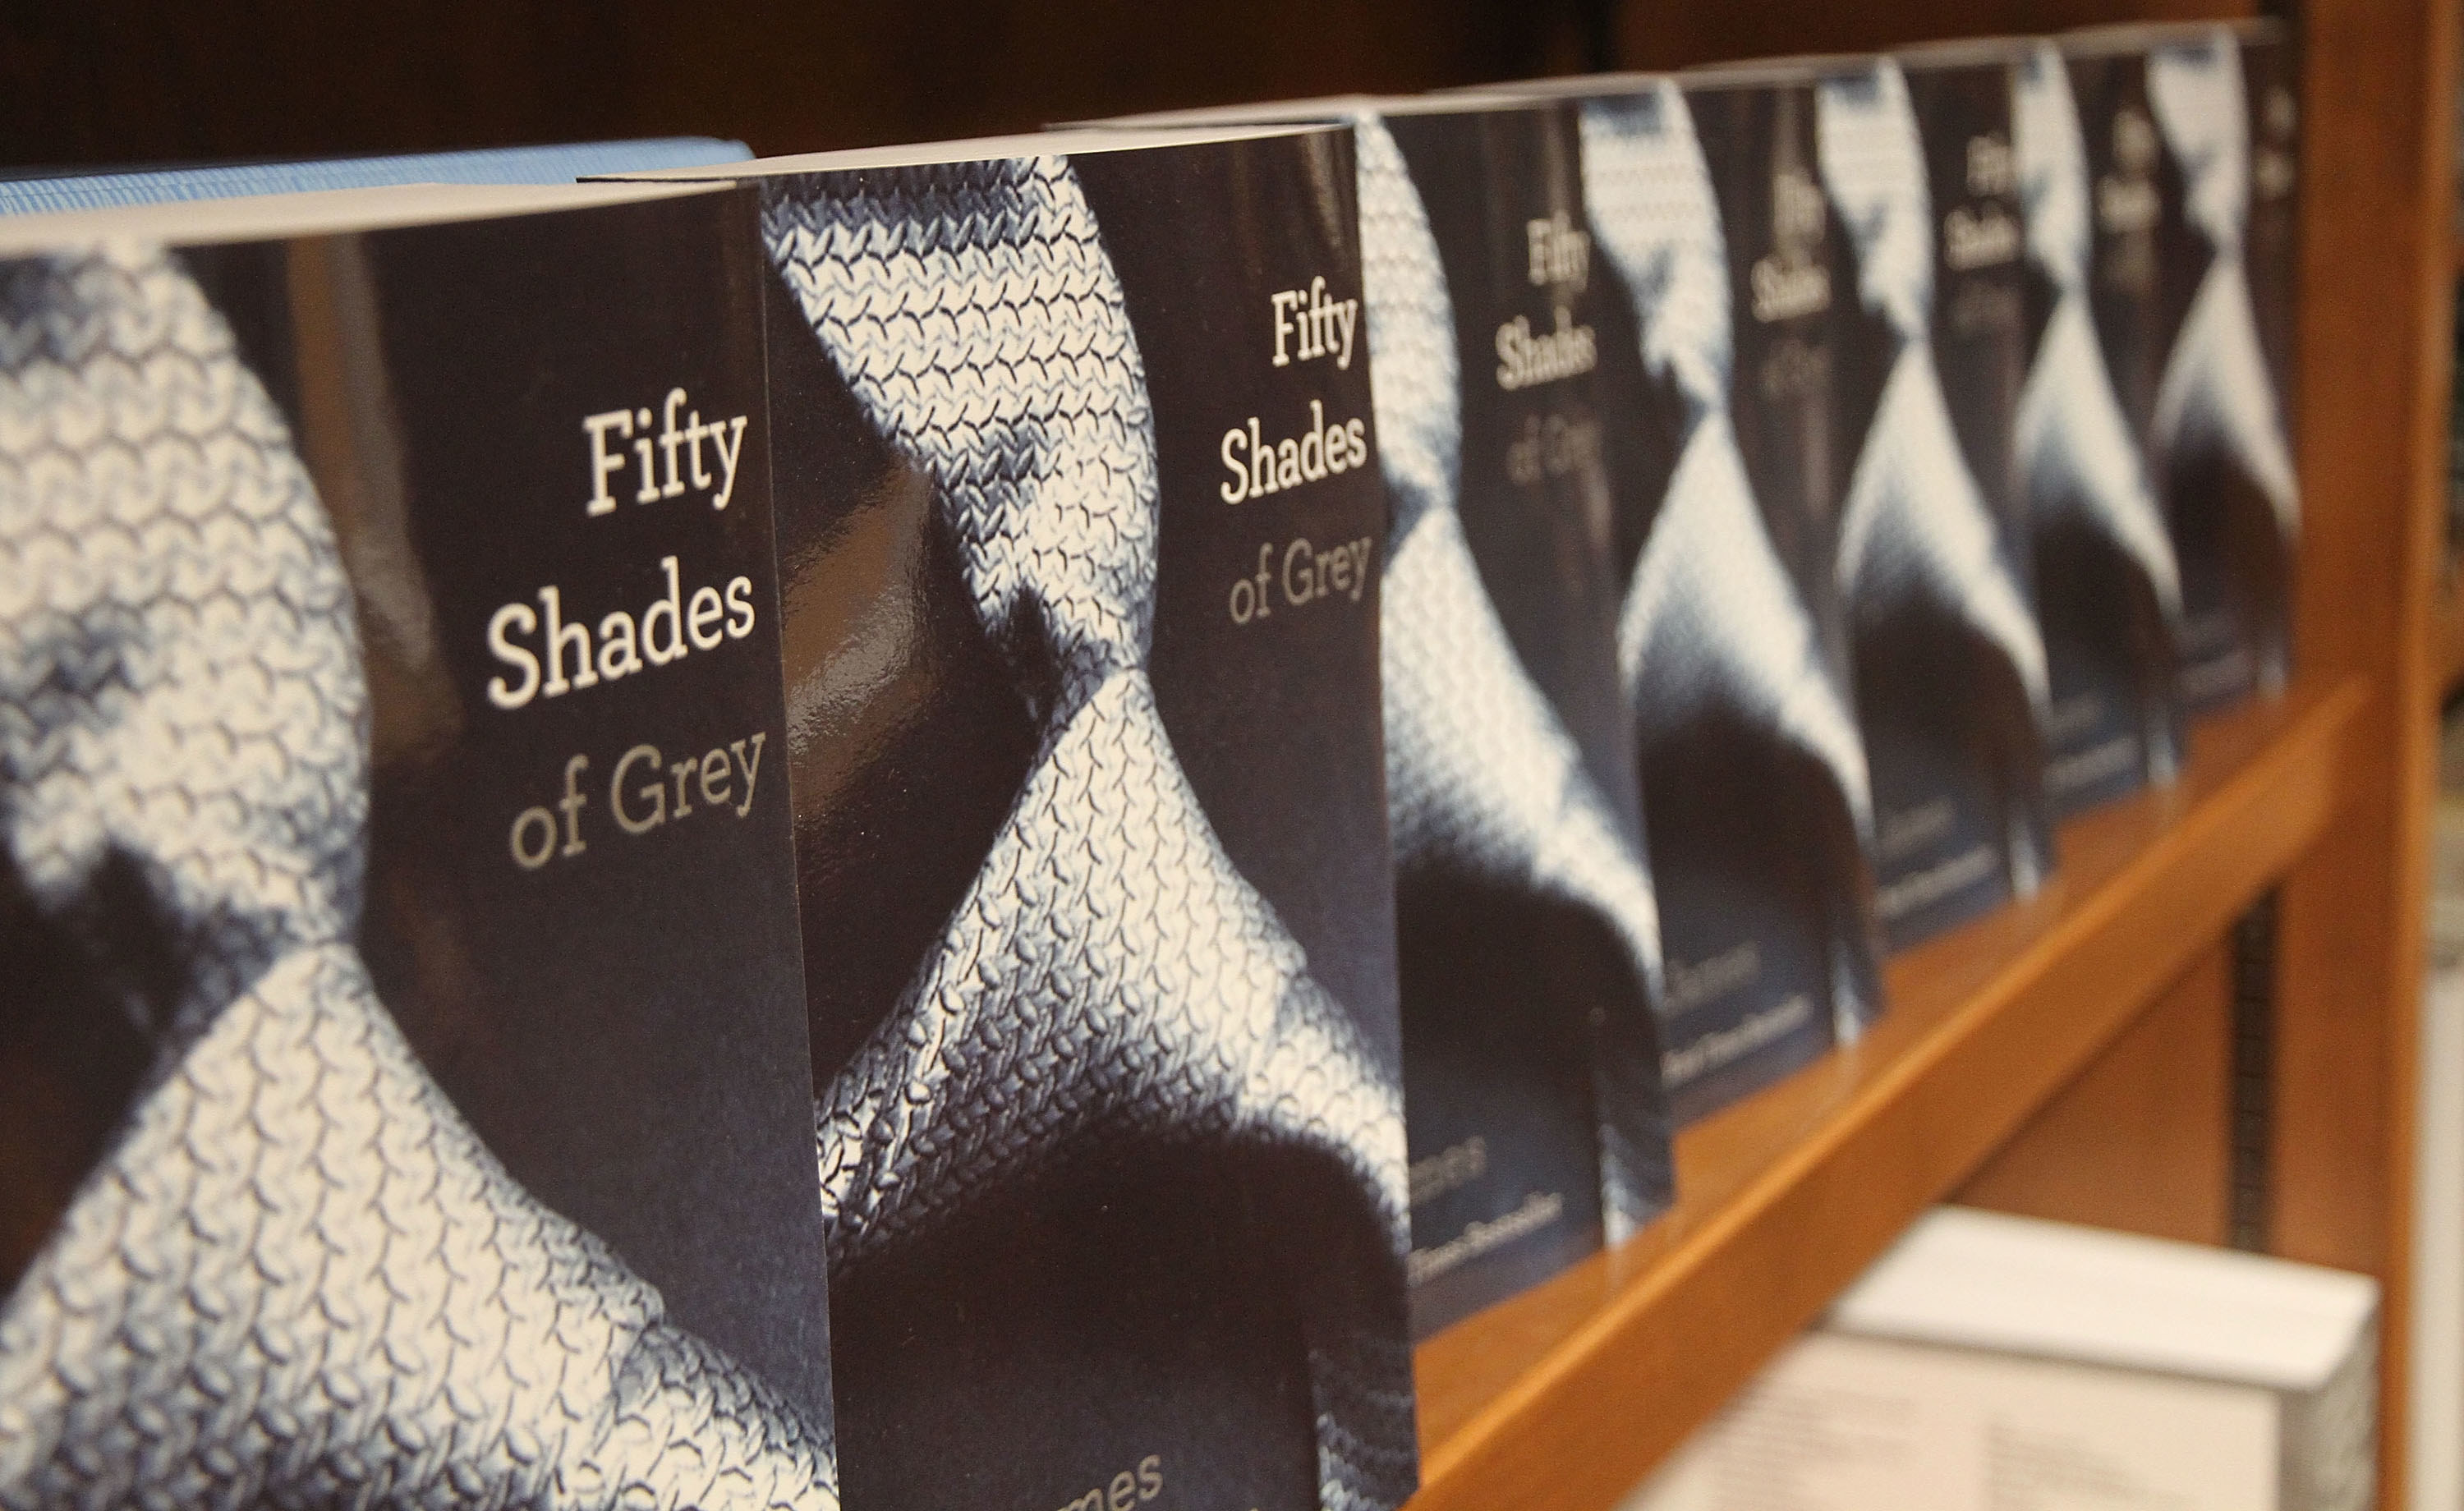 Several copies of the book Fifty Shades of Grey on a shelf